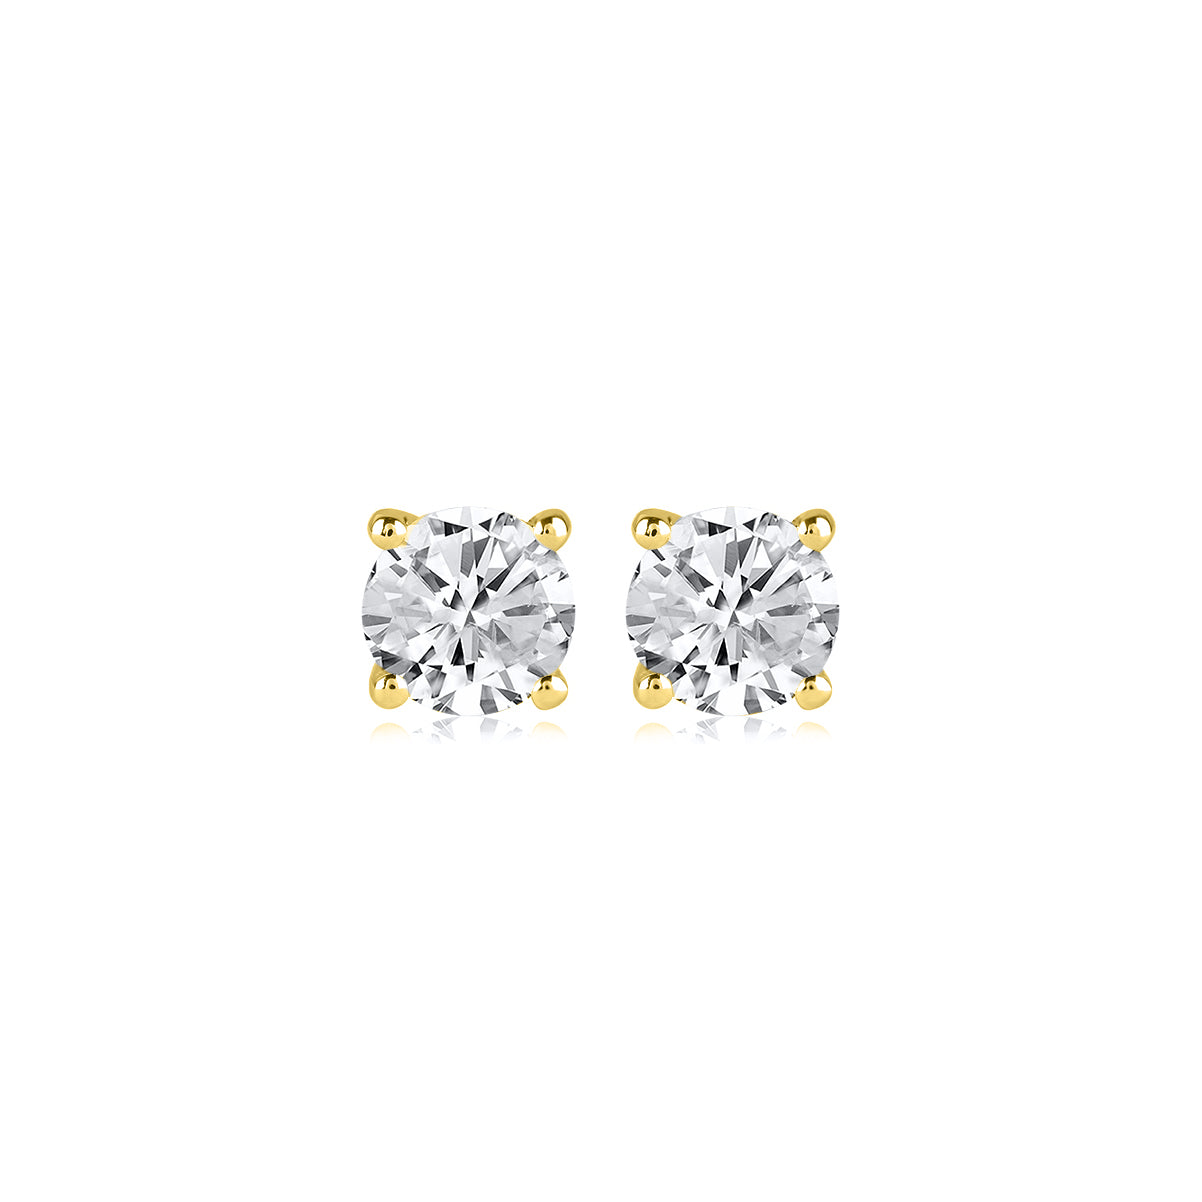 0.40 Carat Solitaire Stud Earrings with Friction Back in 14K Gold